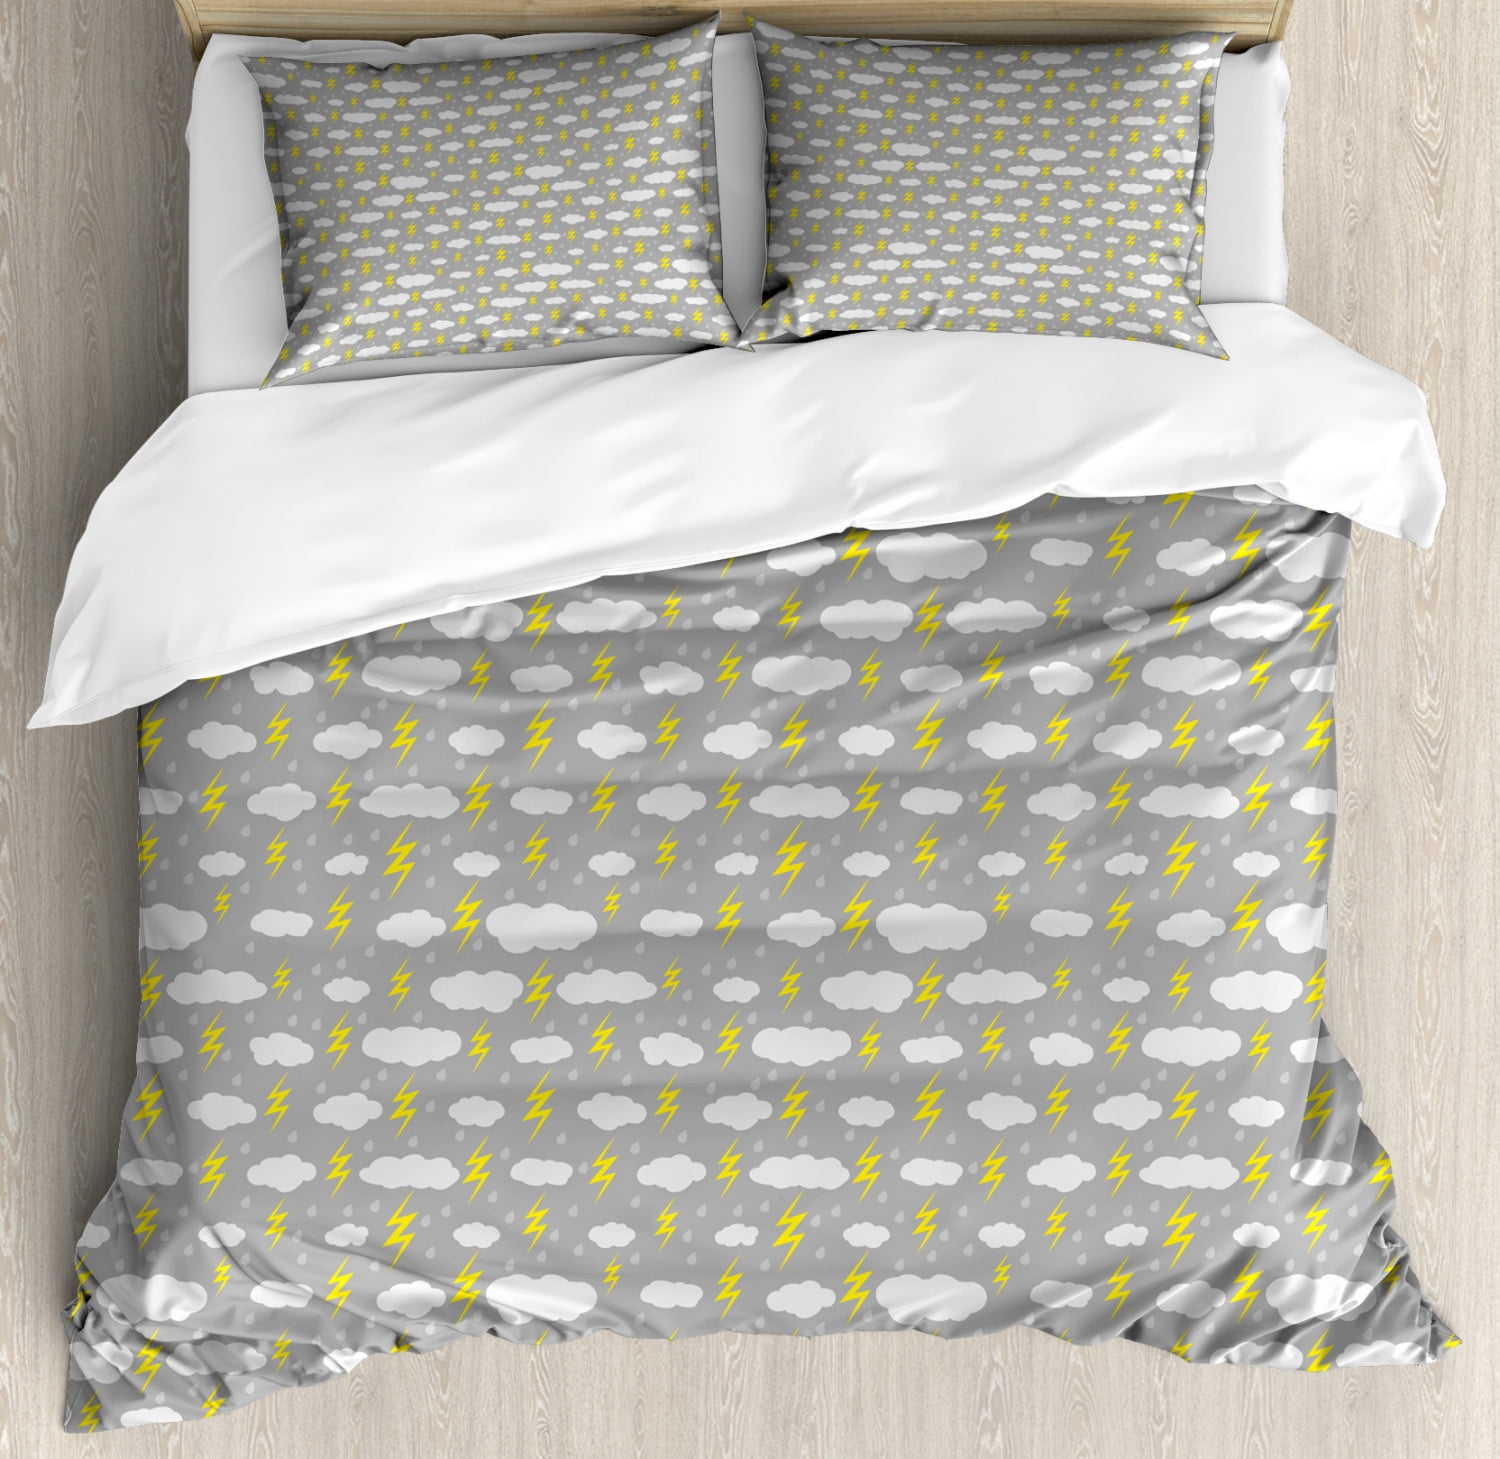 Grey And Yellow King Size Duvet Cover Set Deluge Of Rain Stormy